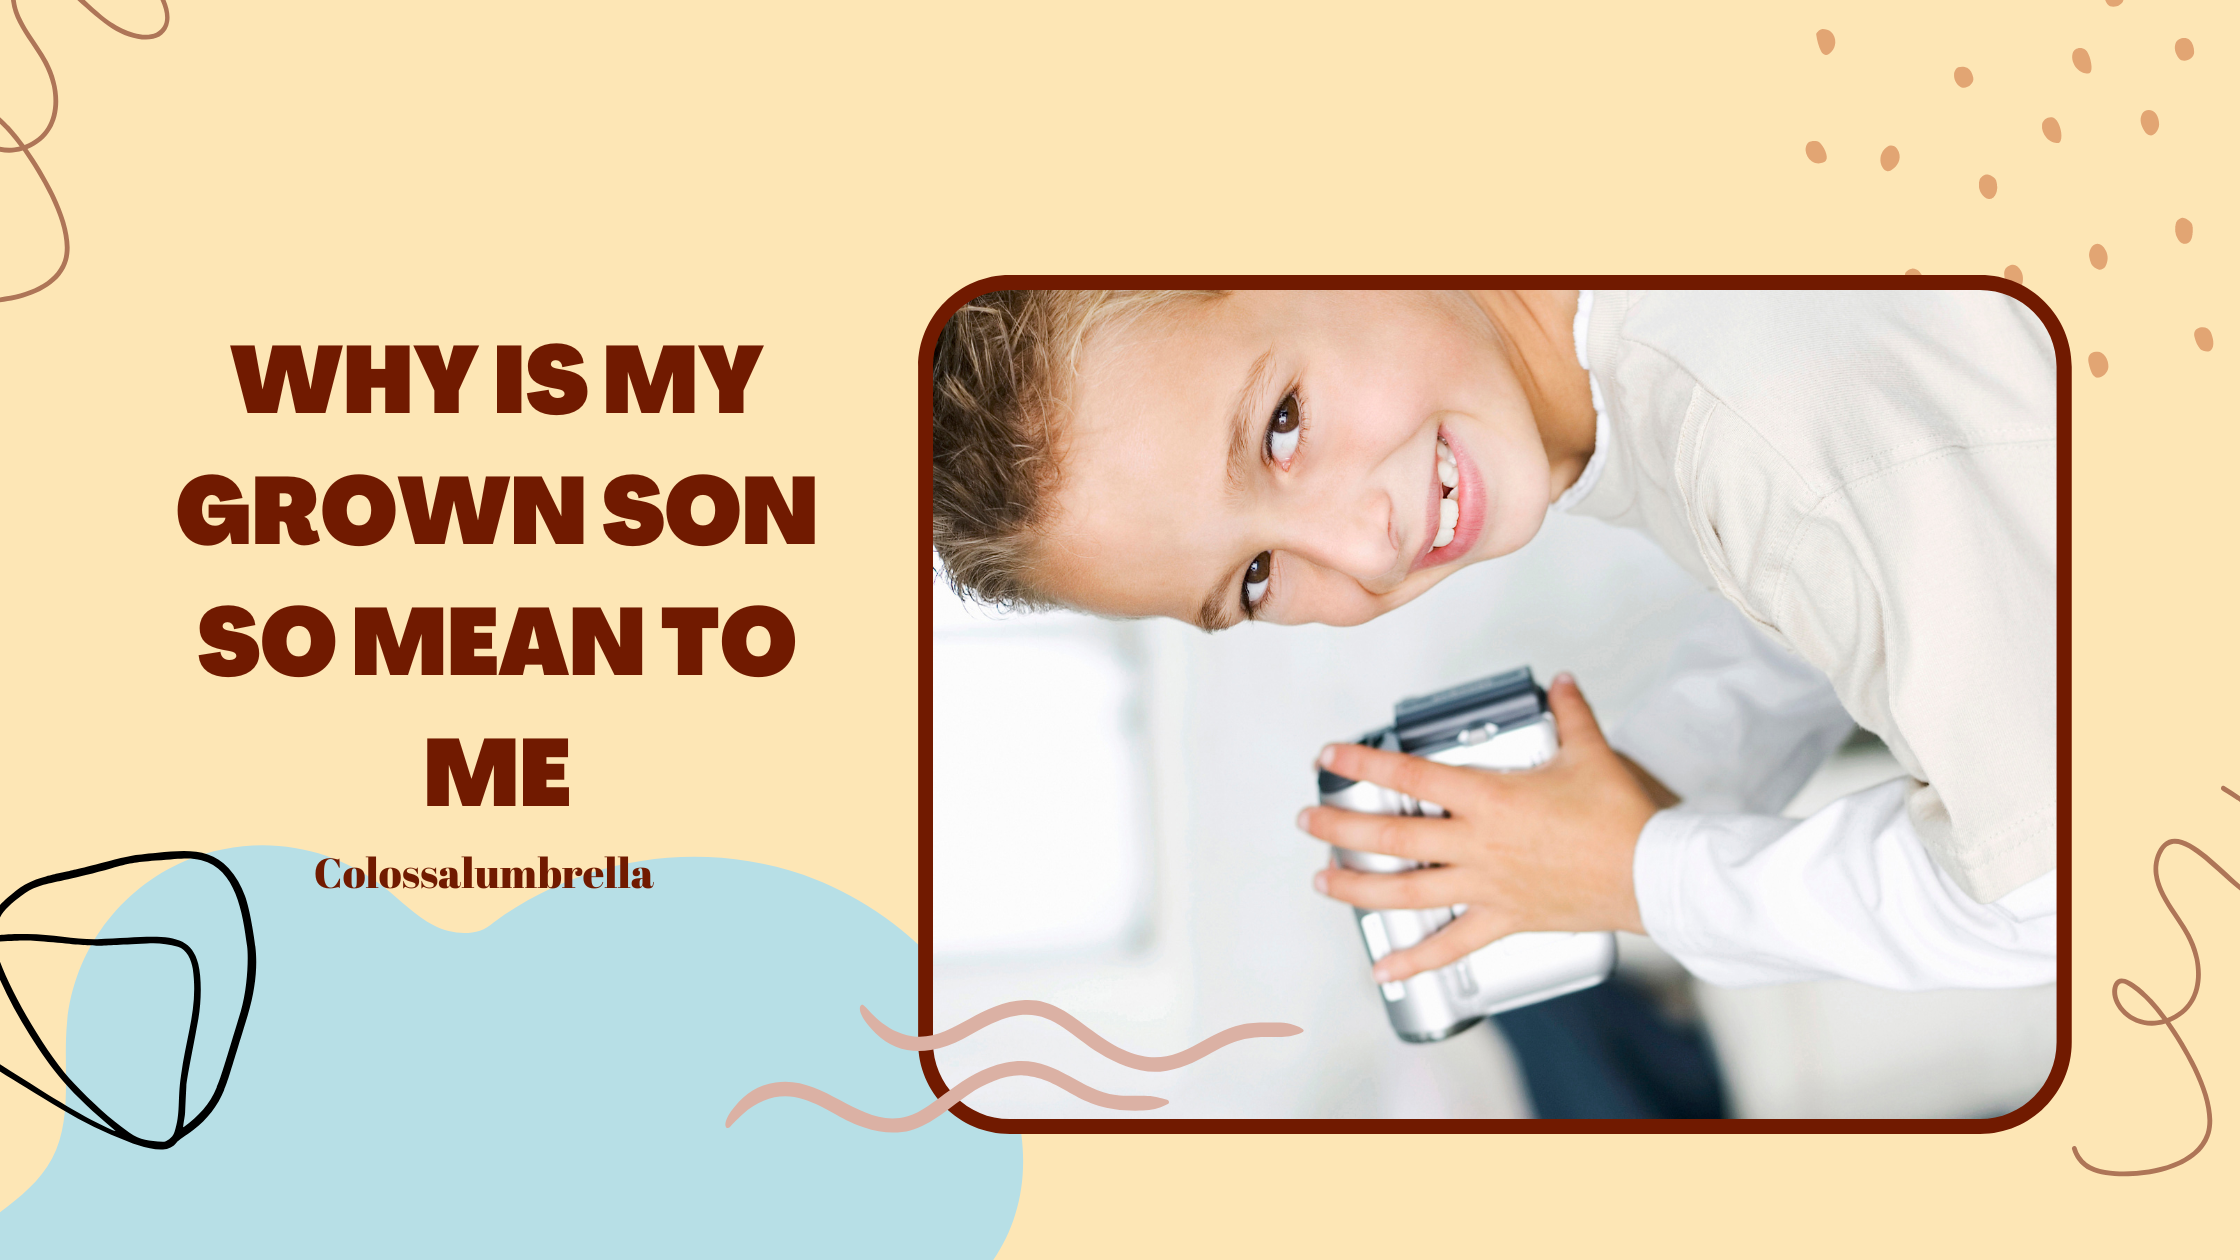 Why is my grown son so mean to me : 6 Easy Strategies To Get Through To Him